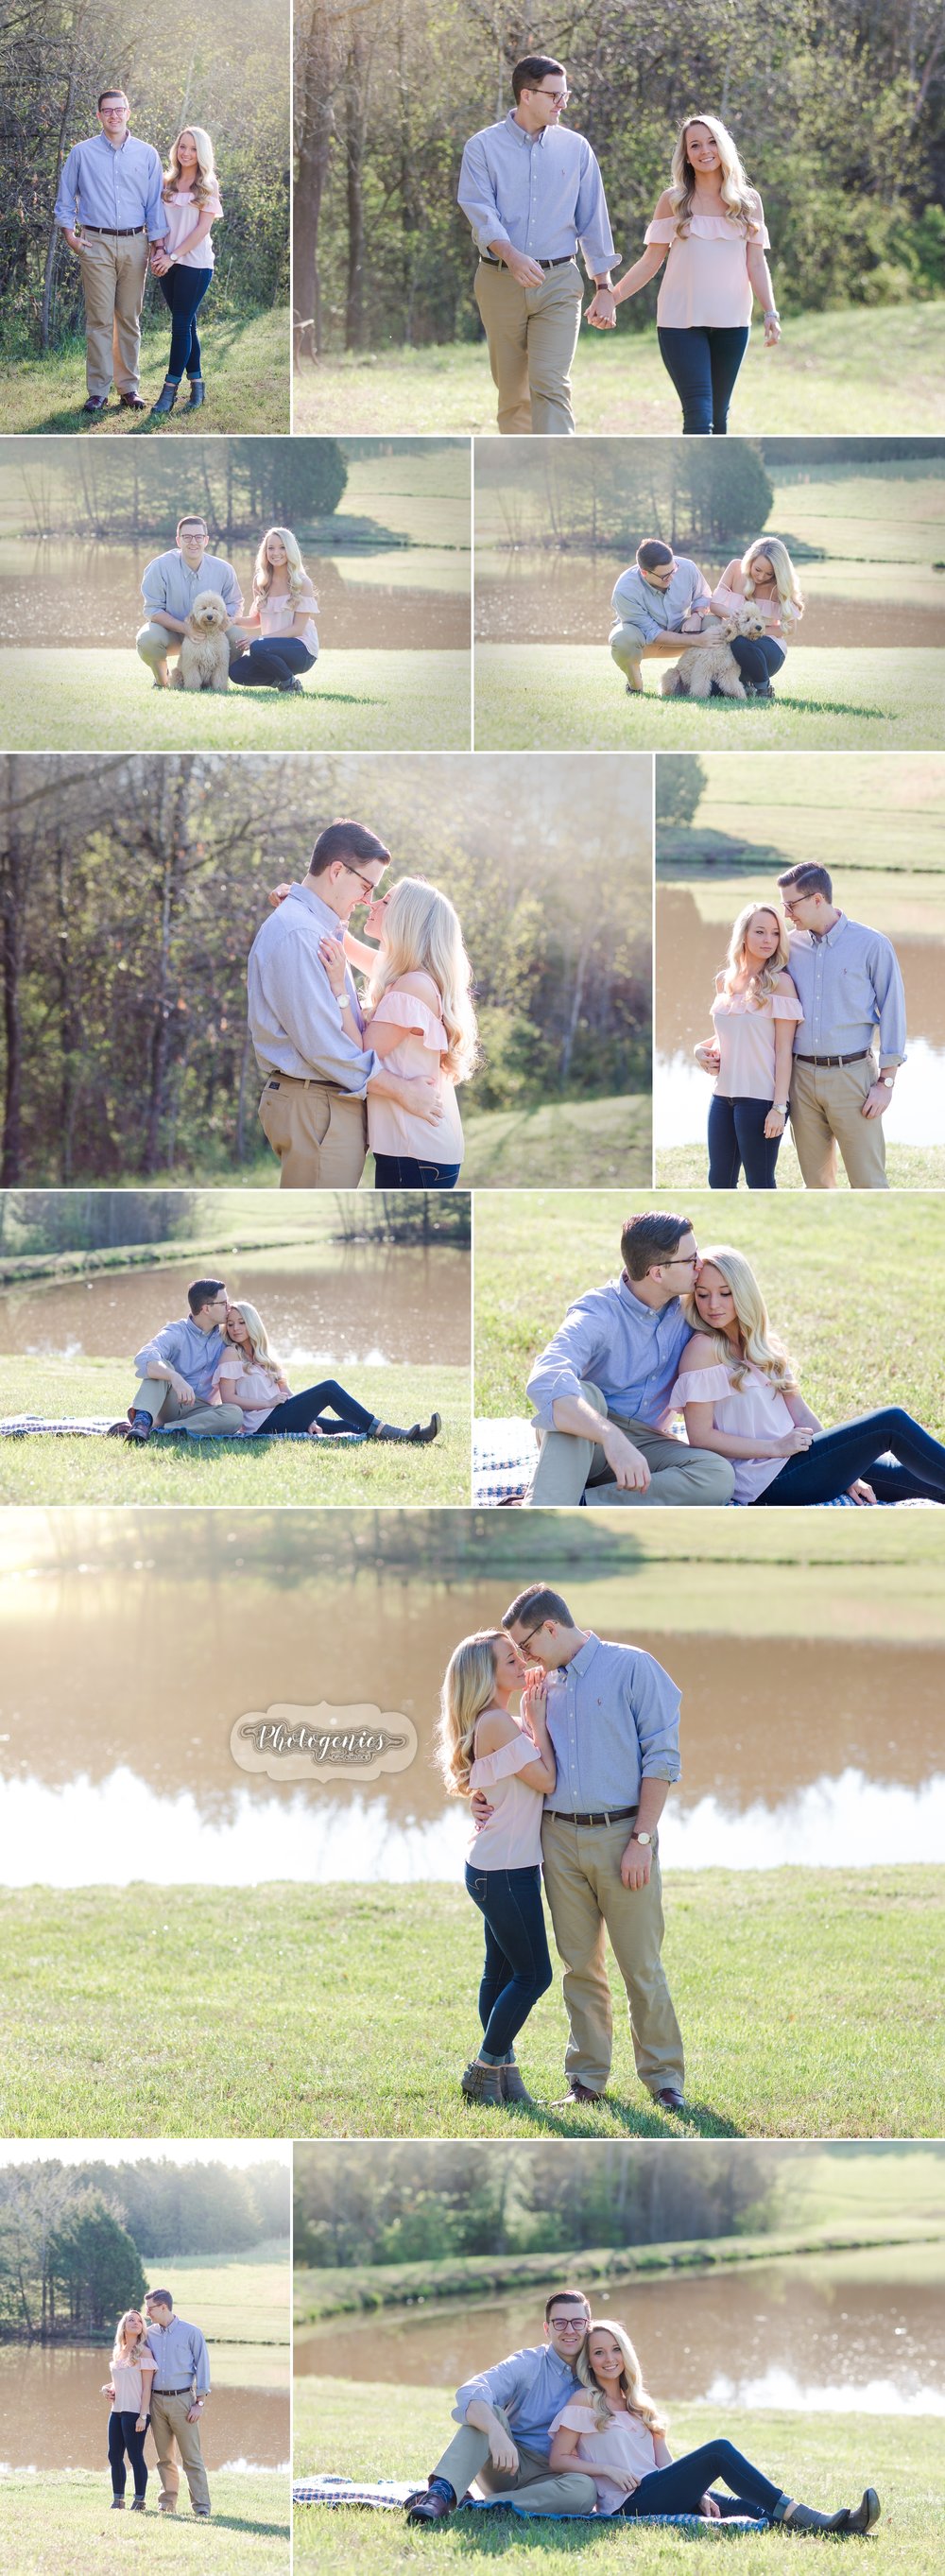  engagement_morning_pictures_field_flowers_poses_wedding_ideas_greenery_spring_lake_pond 1 